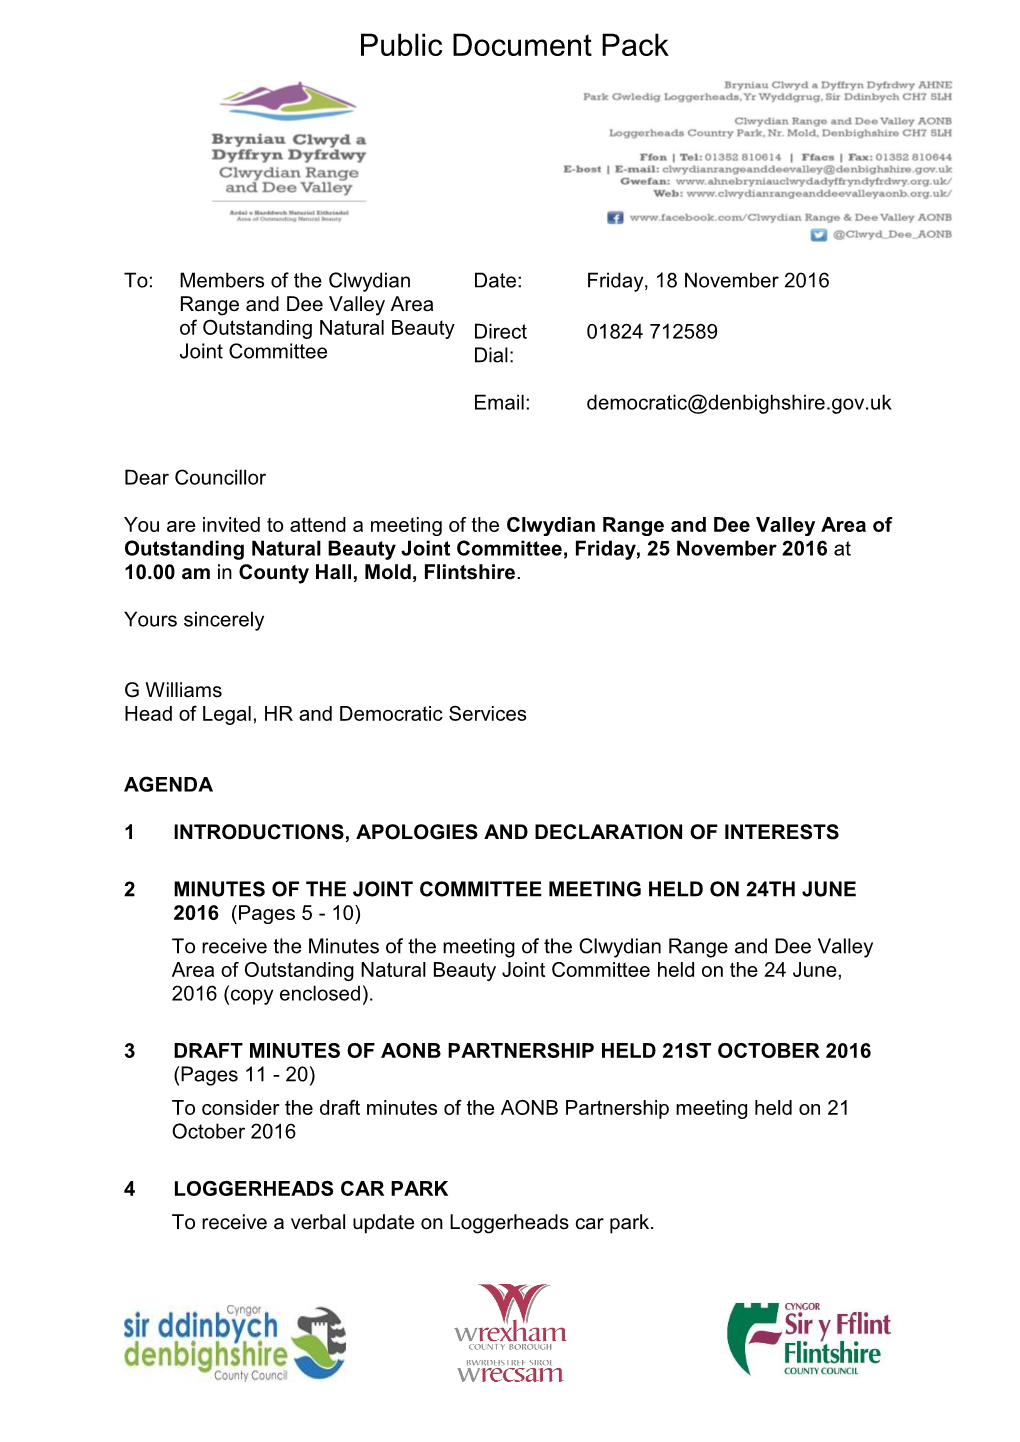 (Public Pack)Agenda Document for Clwydian Range and Dee Valley Area of Outstanding Natural Beauty Joint Committee, 25/11/2016 10